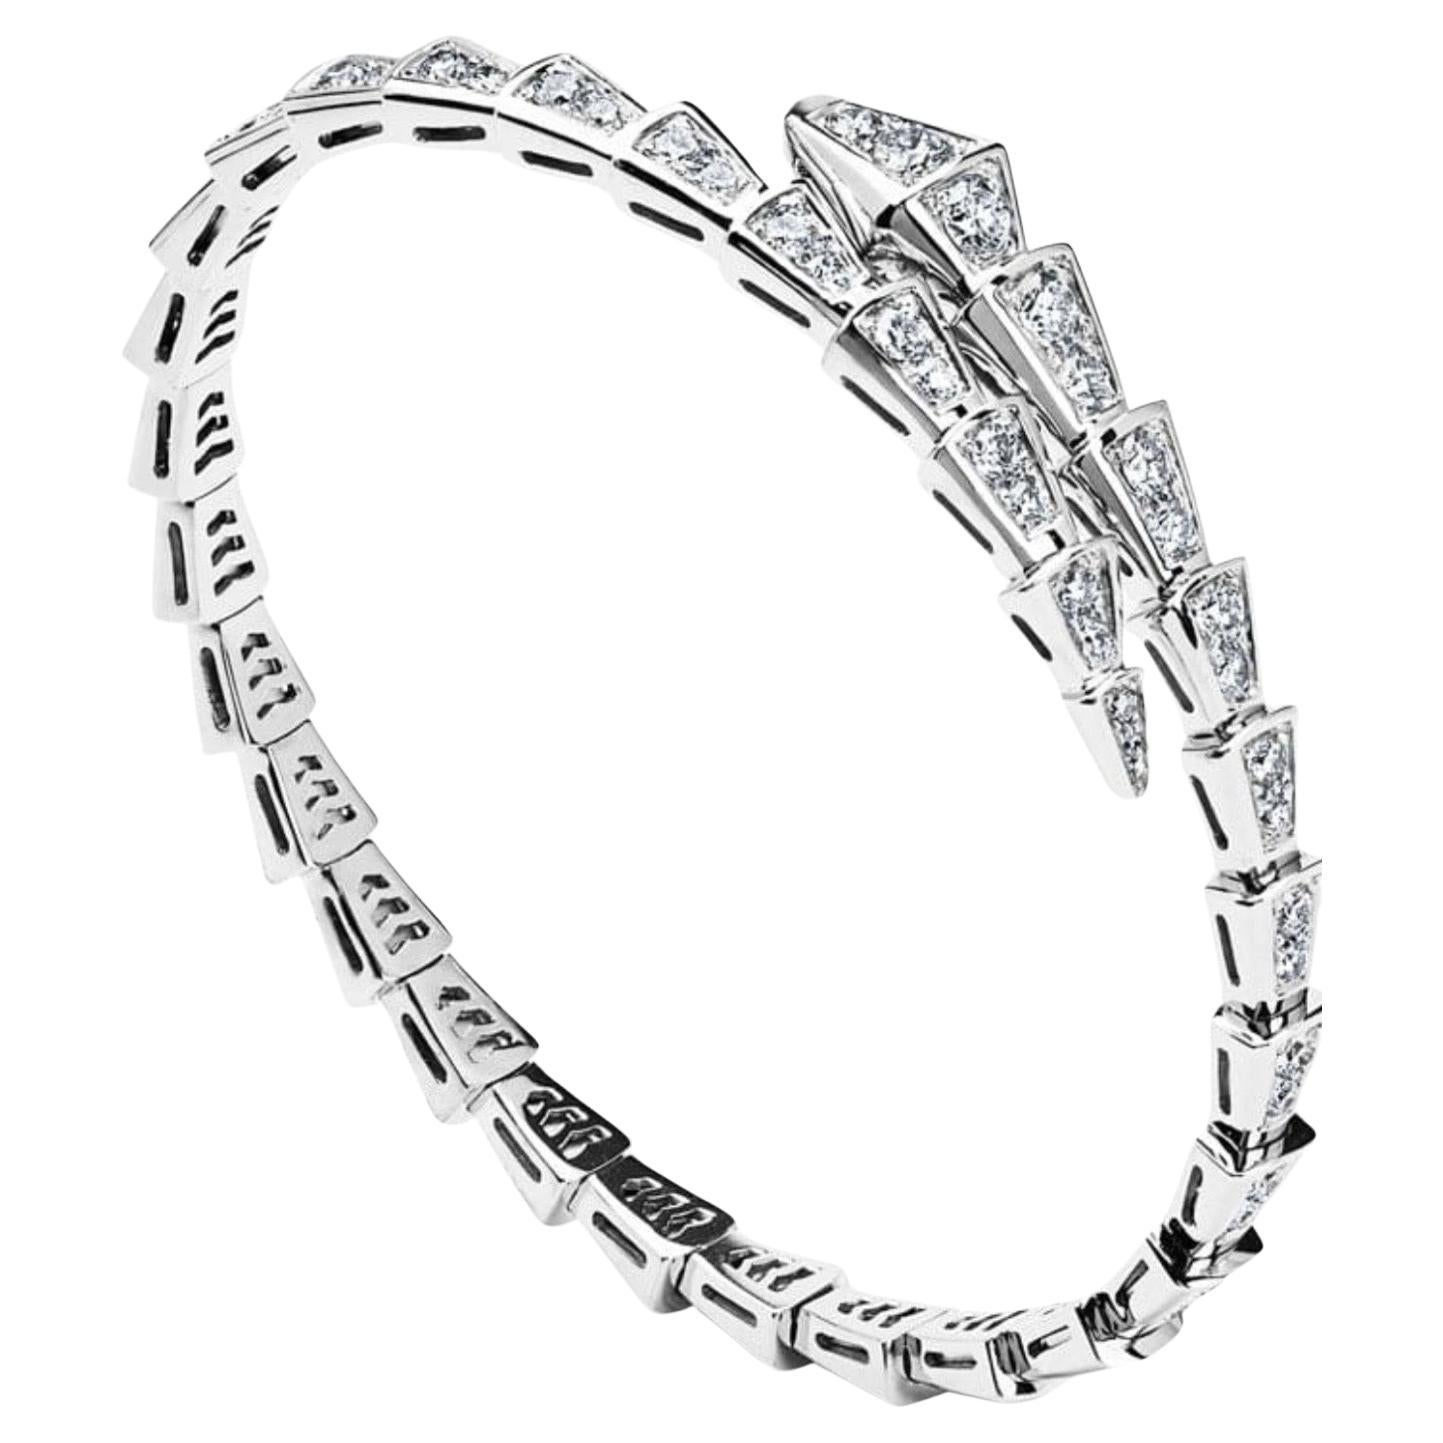 This bangle is not by Bvlgari 
18k White Gold 5 Ct Pave Diamond Serpenti Viper Slim Bracelet in a size small to medium is a tribute to the spirit animal, capturing seduction through a hypnotic design. This sophisticated jewel coils around the wrist,